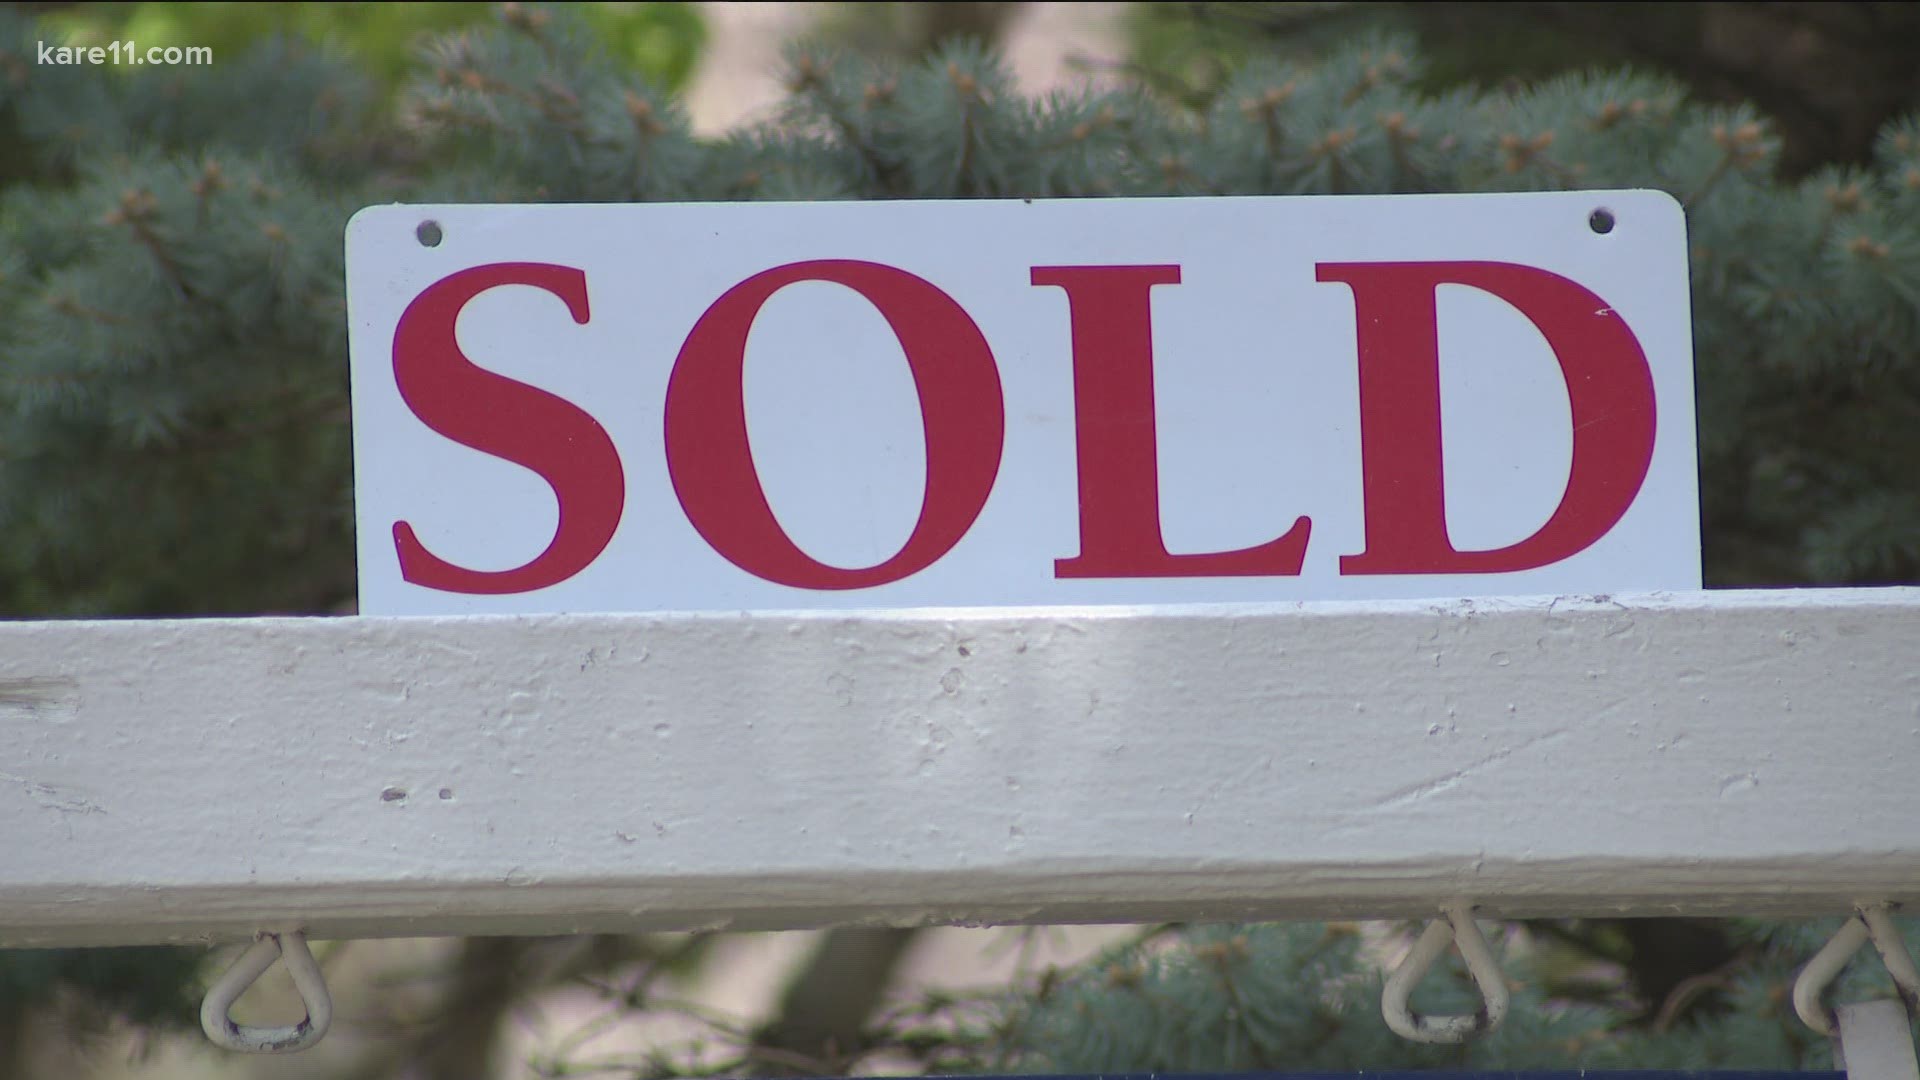 A local realtor offers some insight on the current state of the housing market.